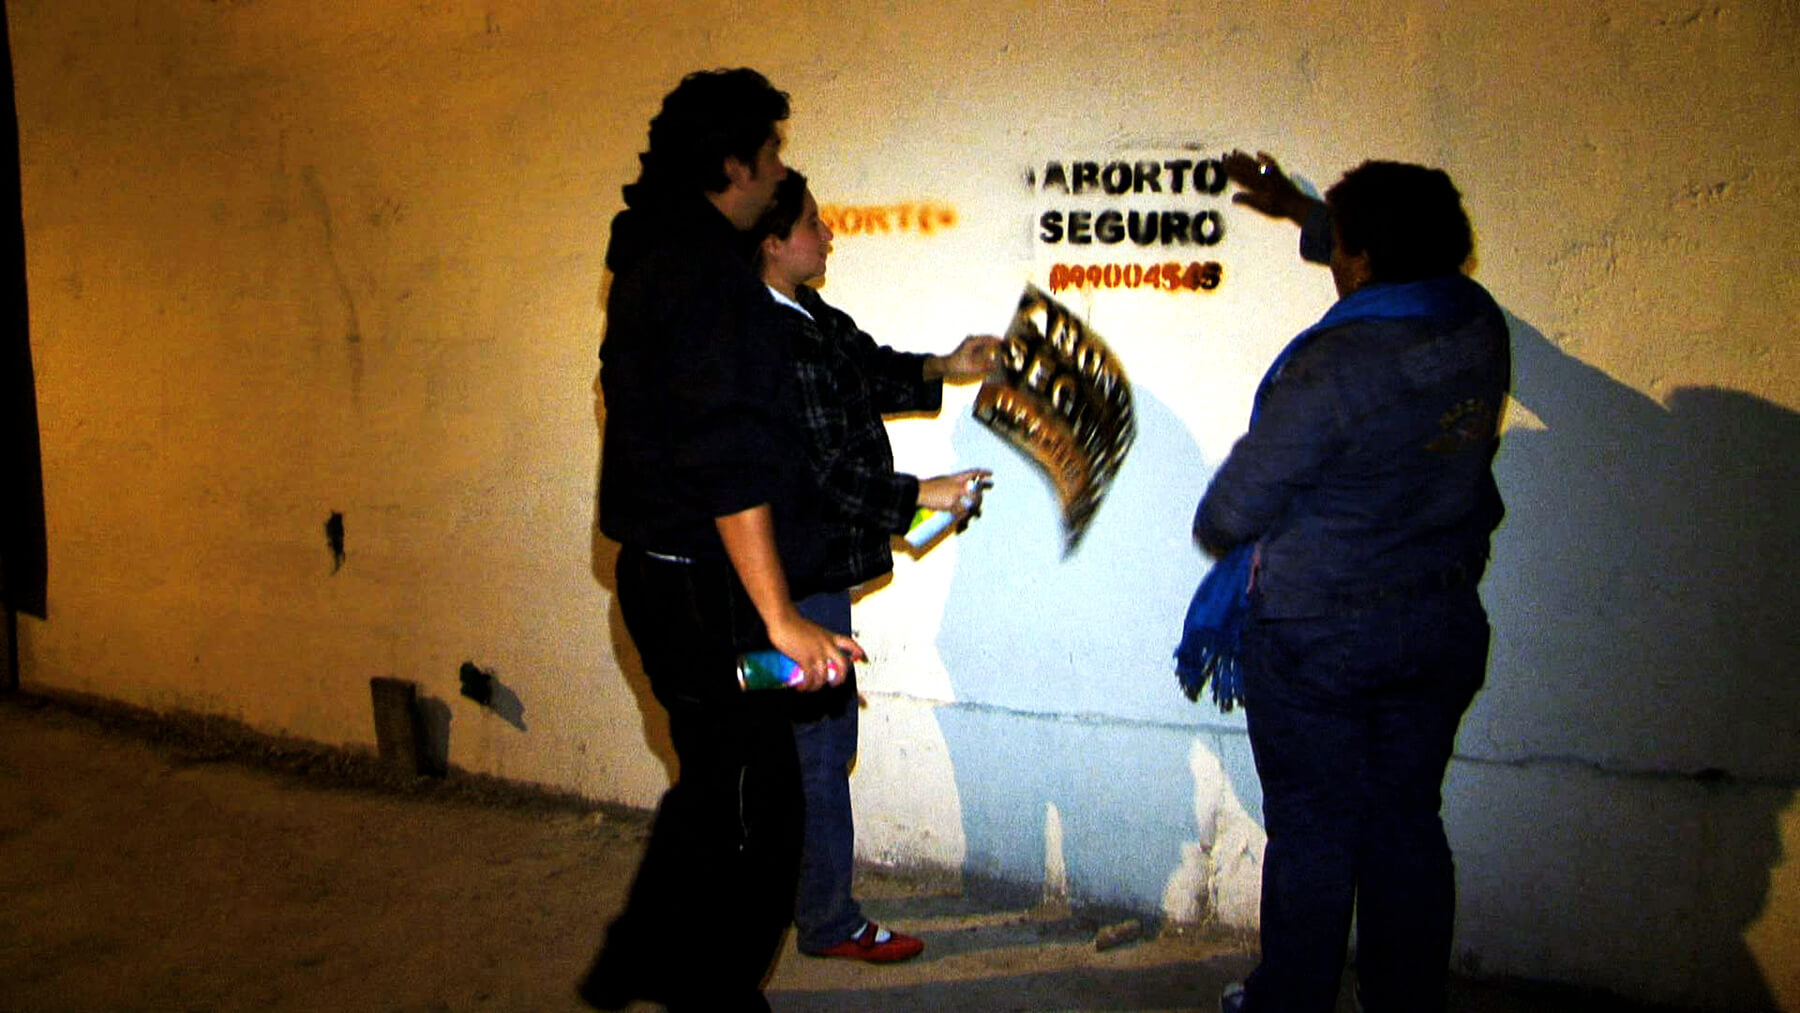 Still from Vessel. Three people are standing by a concrete wall in the dark. The wall is lit by a light, and they had just spray-painted a stencil on the wall.